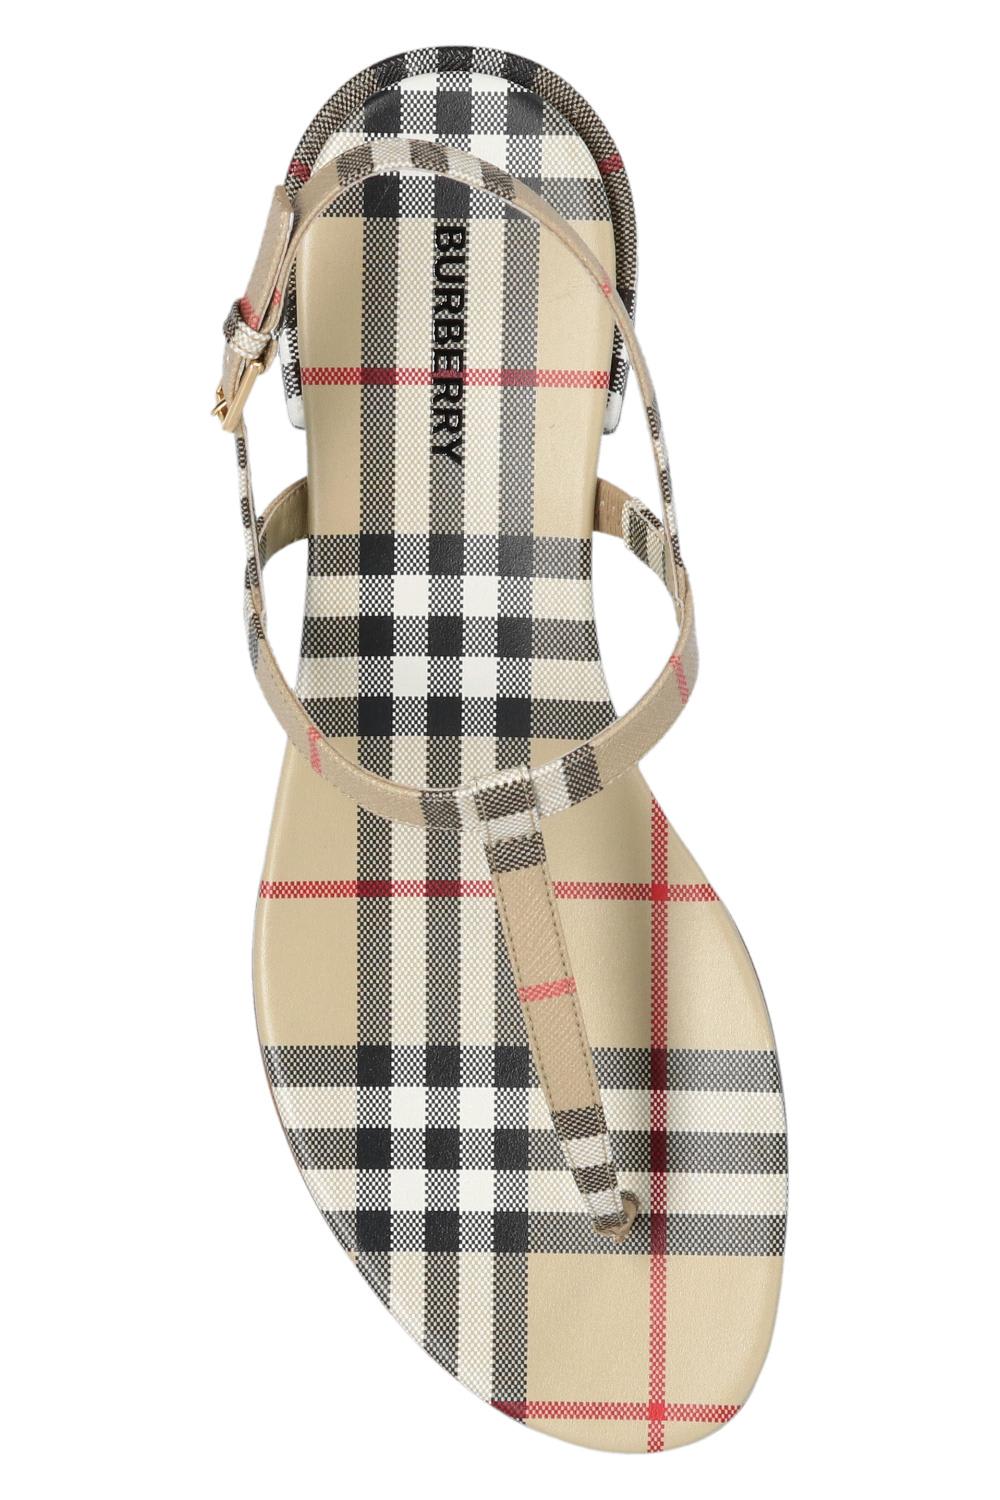 Shop Burberry Sandals With A Check Pattern